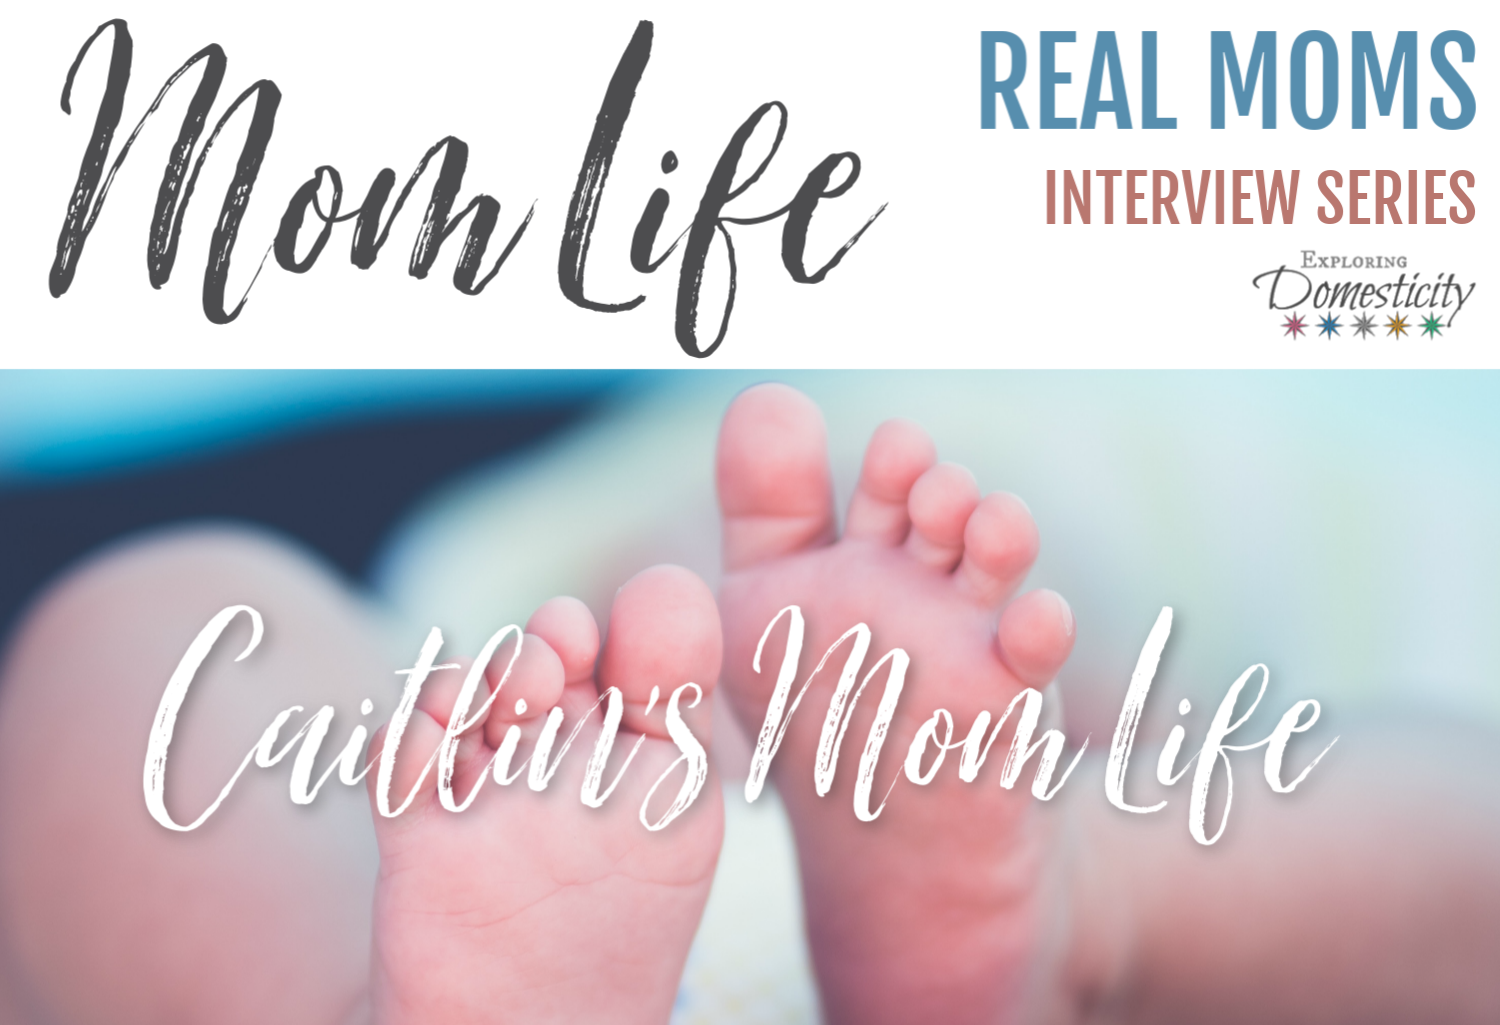 Caitlin's Mom Life - Real Moms Interview Series